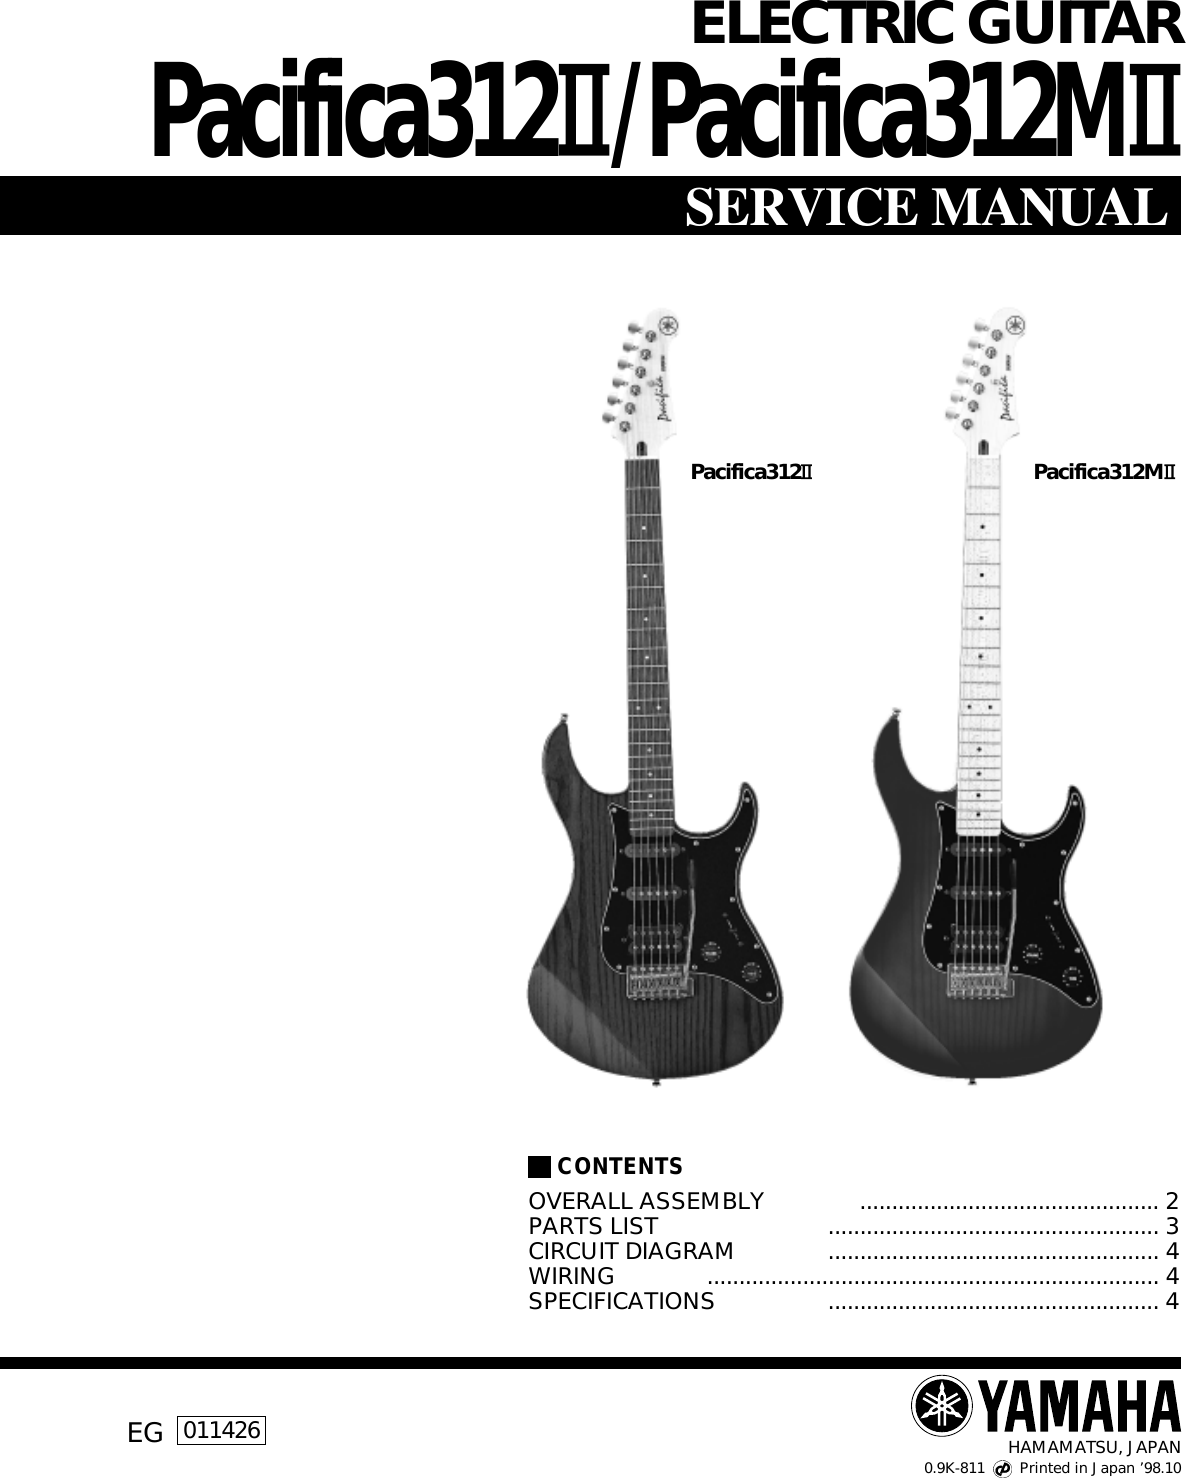 Page 1 of 4 - Yamaha Guitar-Electric-Guitar-Users-Manual ELECTRIC GUITAR  Yamaha-guitar-electric-guitar-users-manual